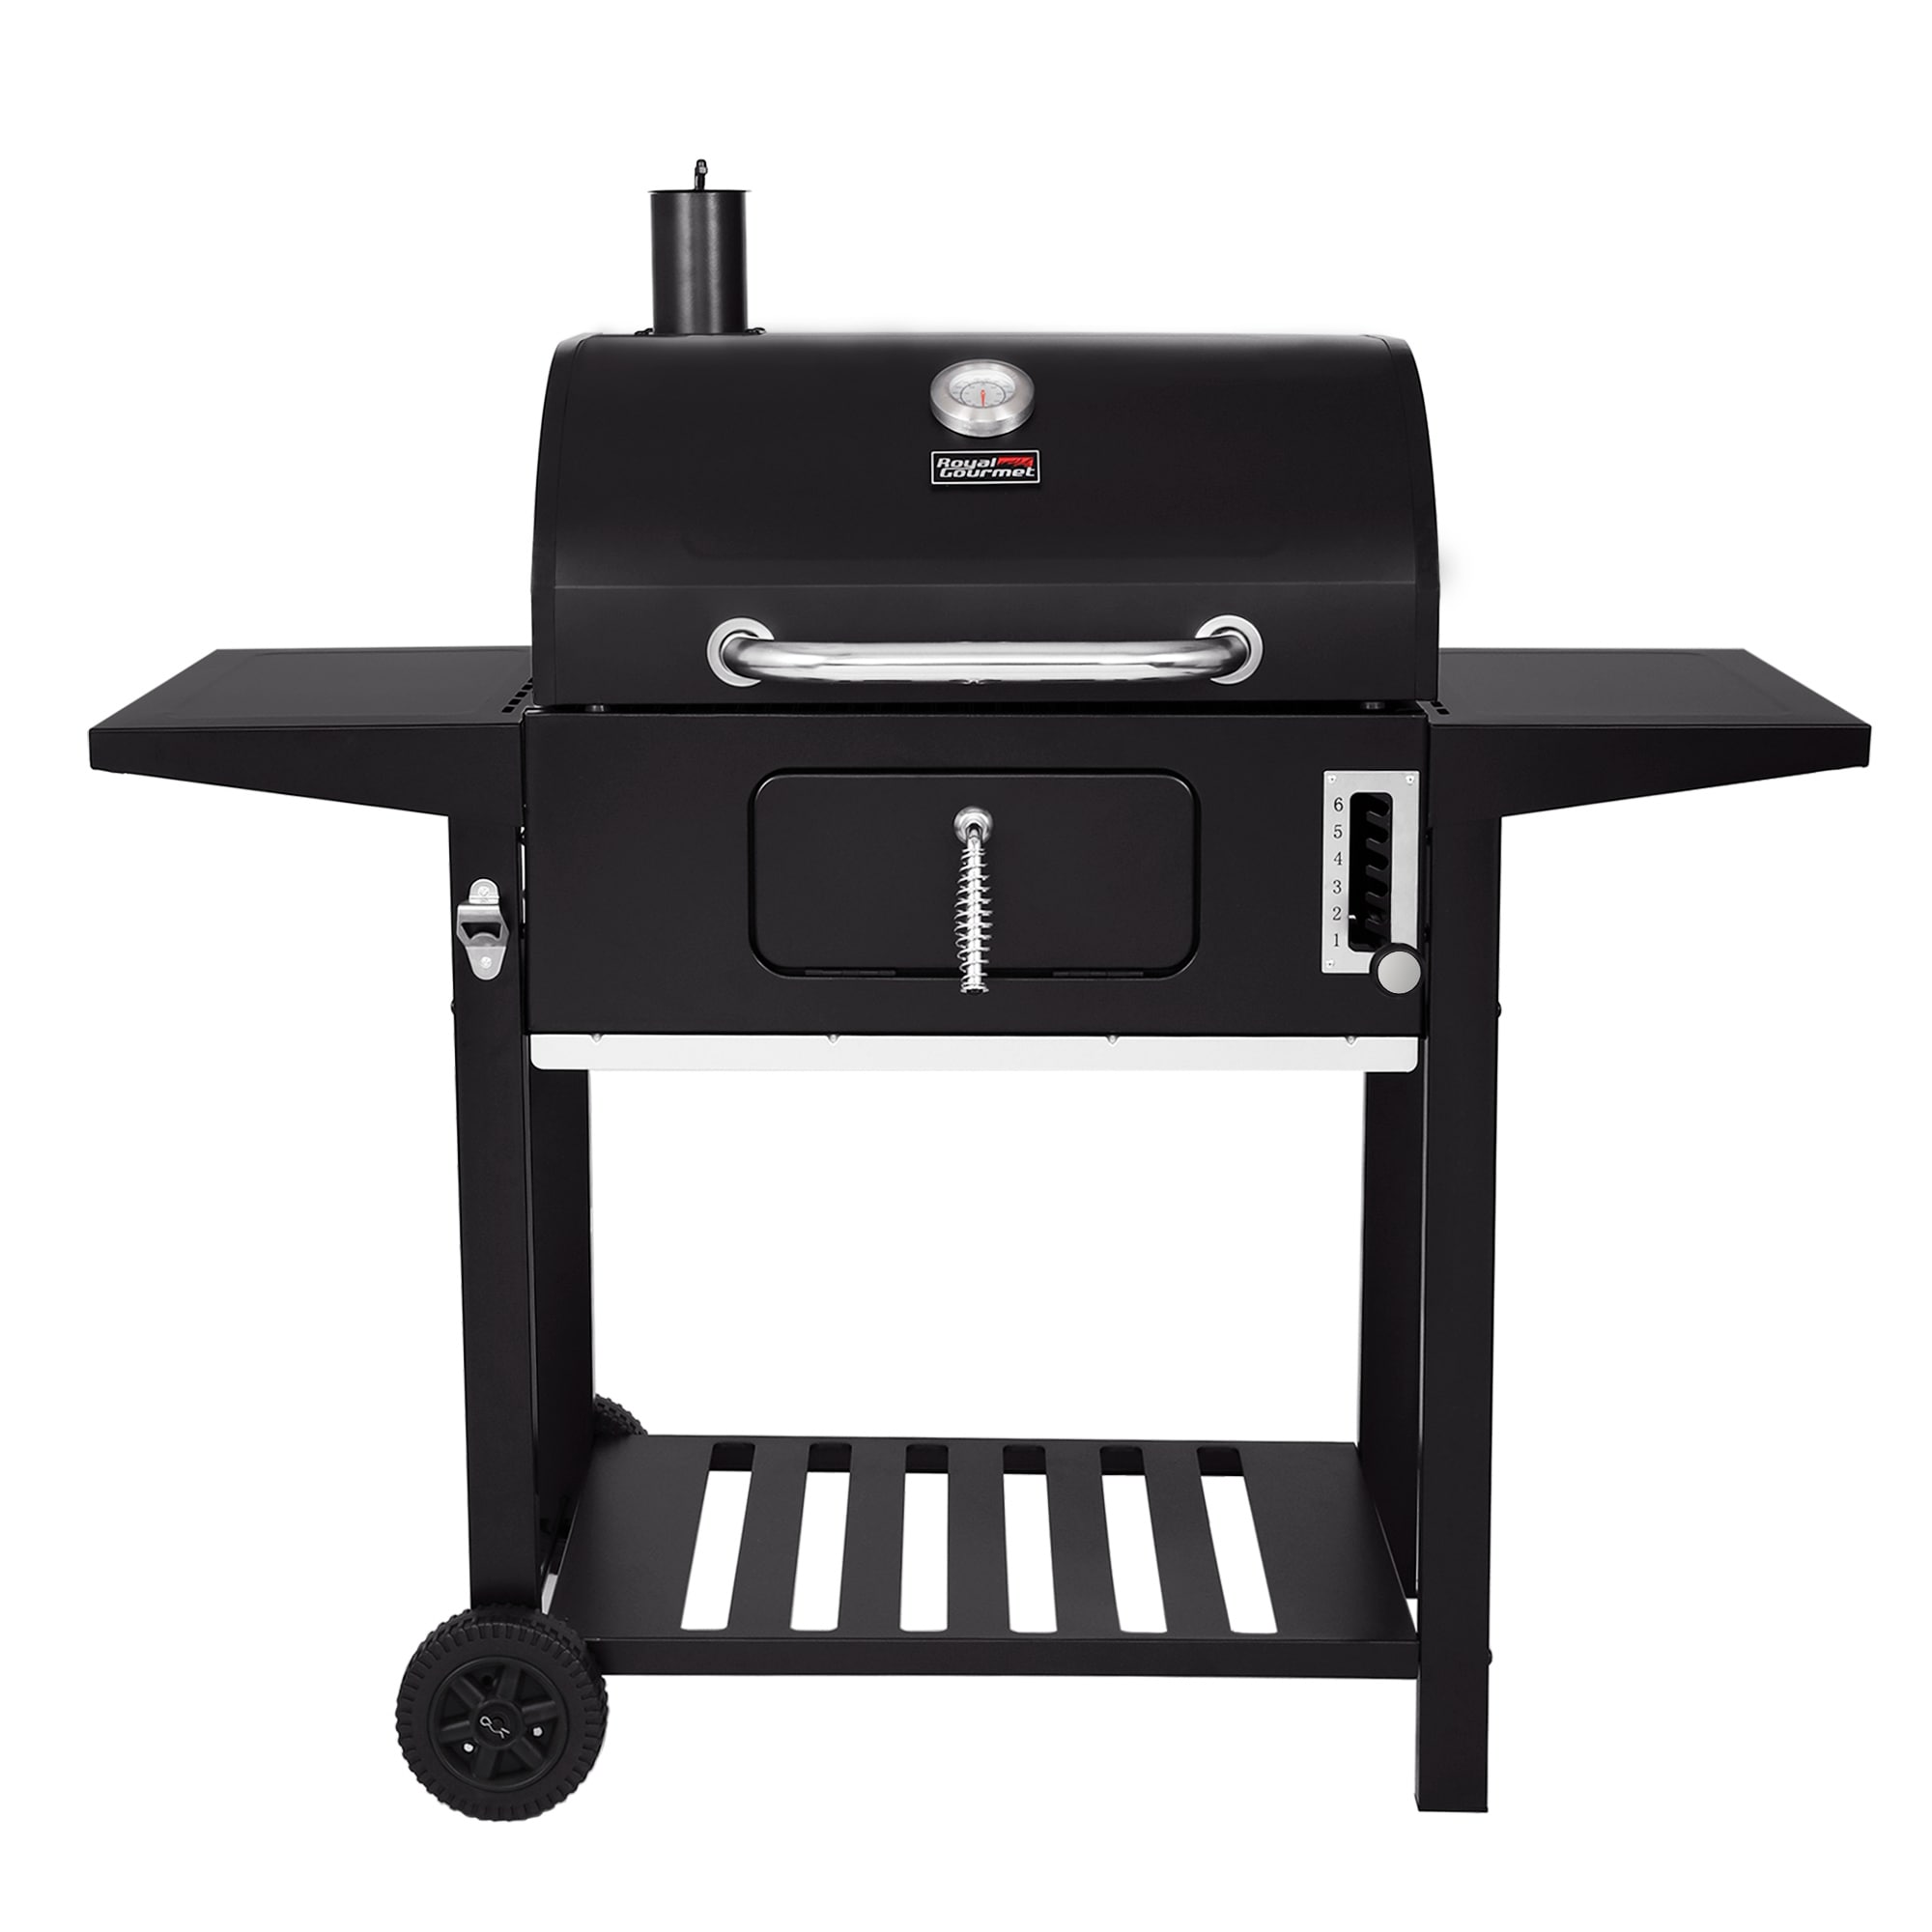 Charcoal Grill Attachment, Rocket Stove Charcoal Grill, Camping